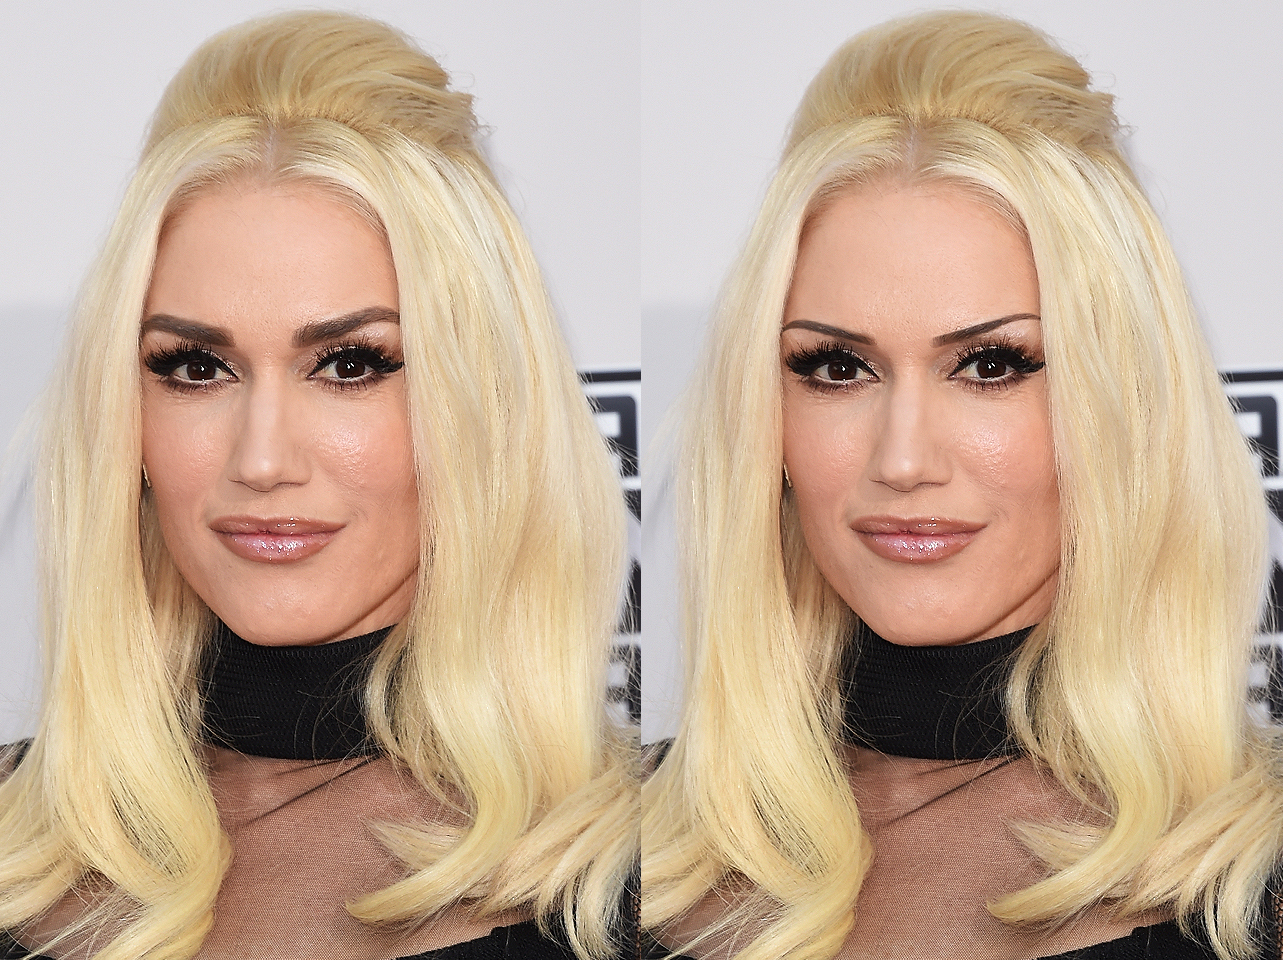 Gwen Stefani's signature brows from 2015 vs digitally edited thin-brow look | Source: Getty Images